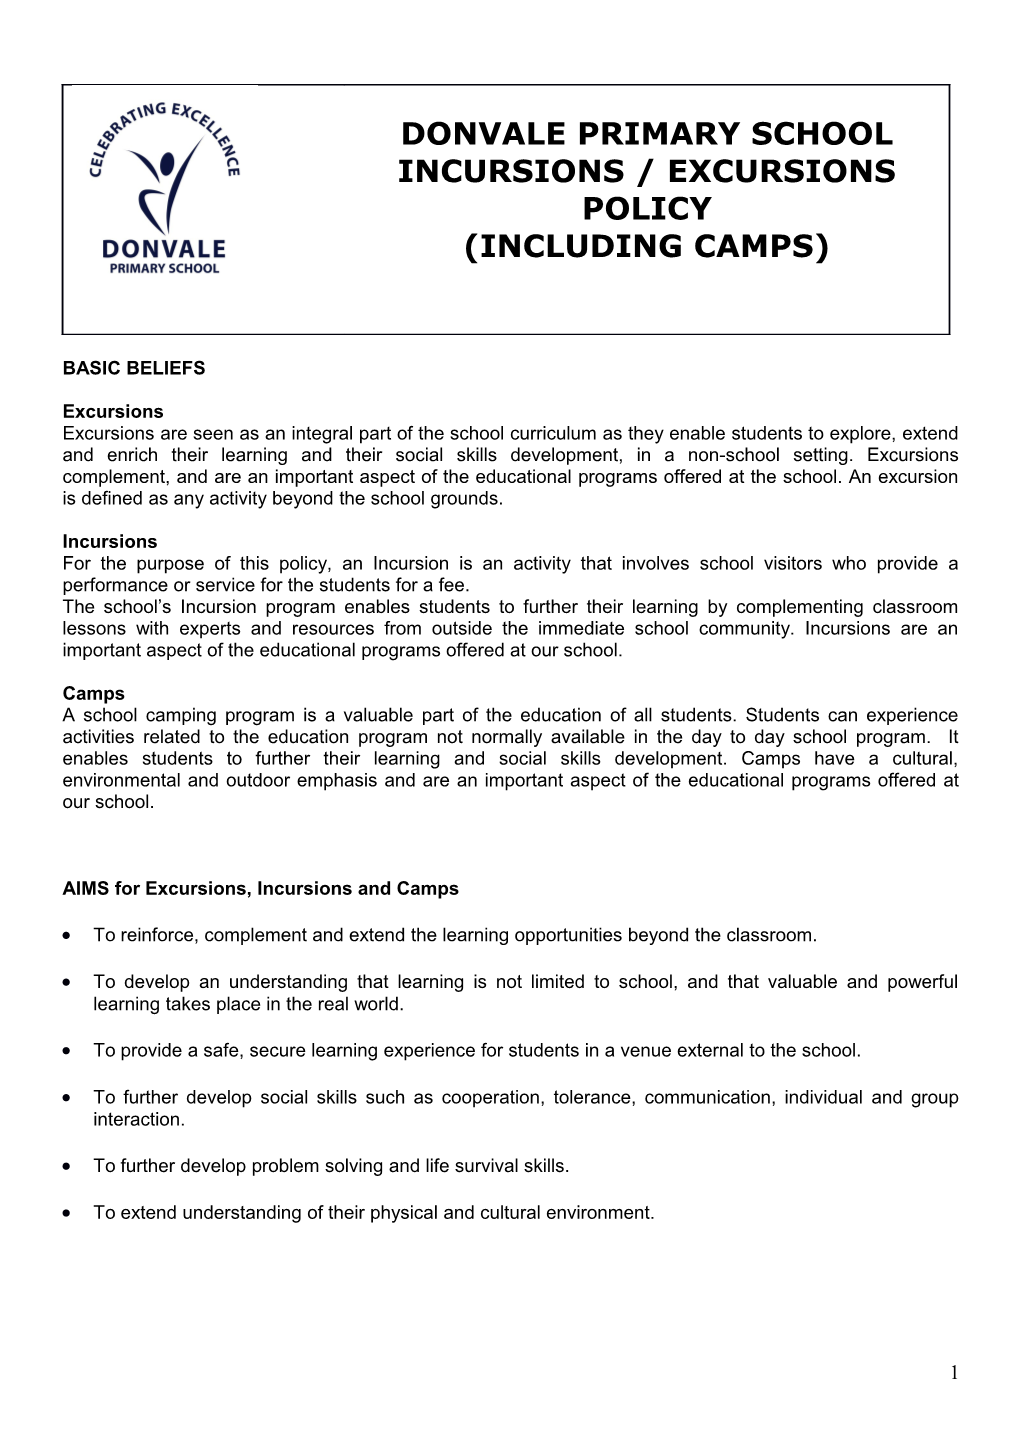 AIMS for Excursions, Incursions and Camps